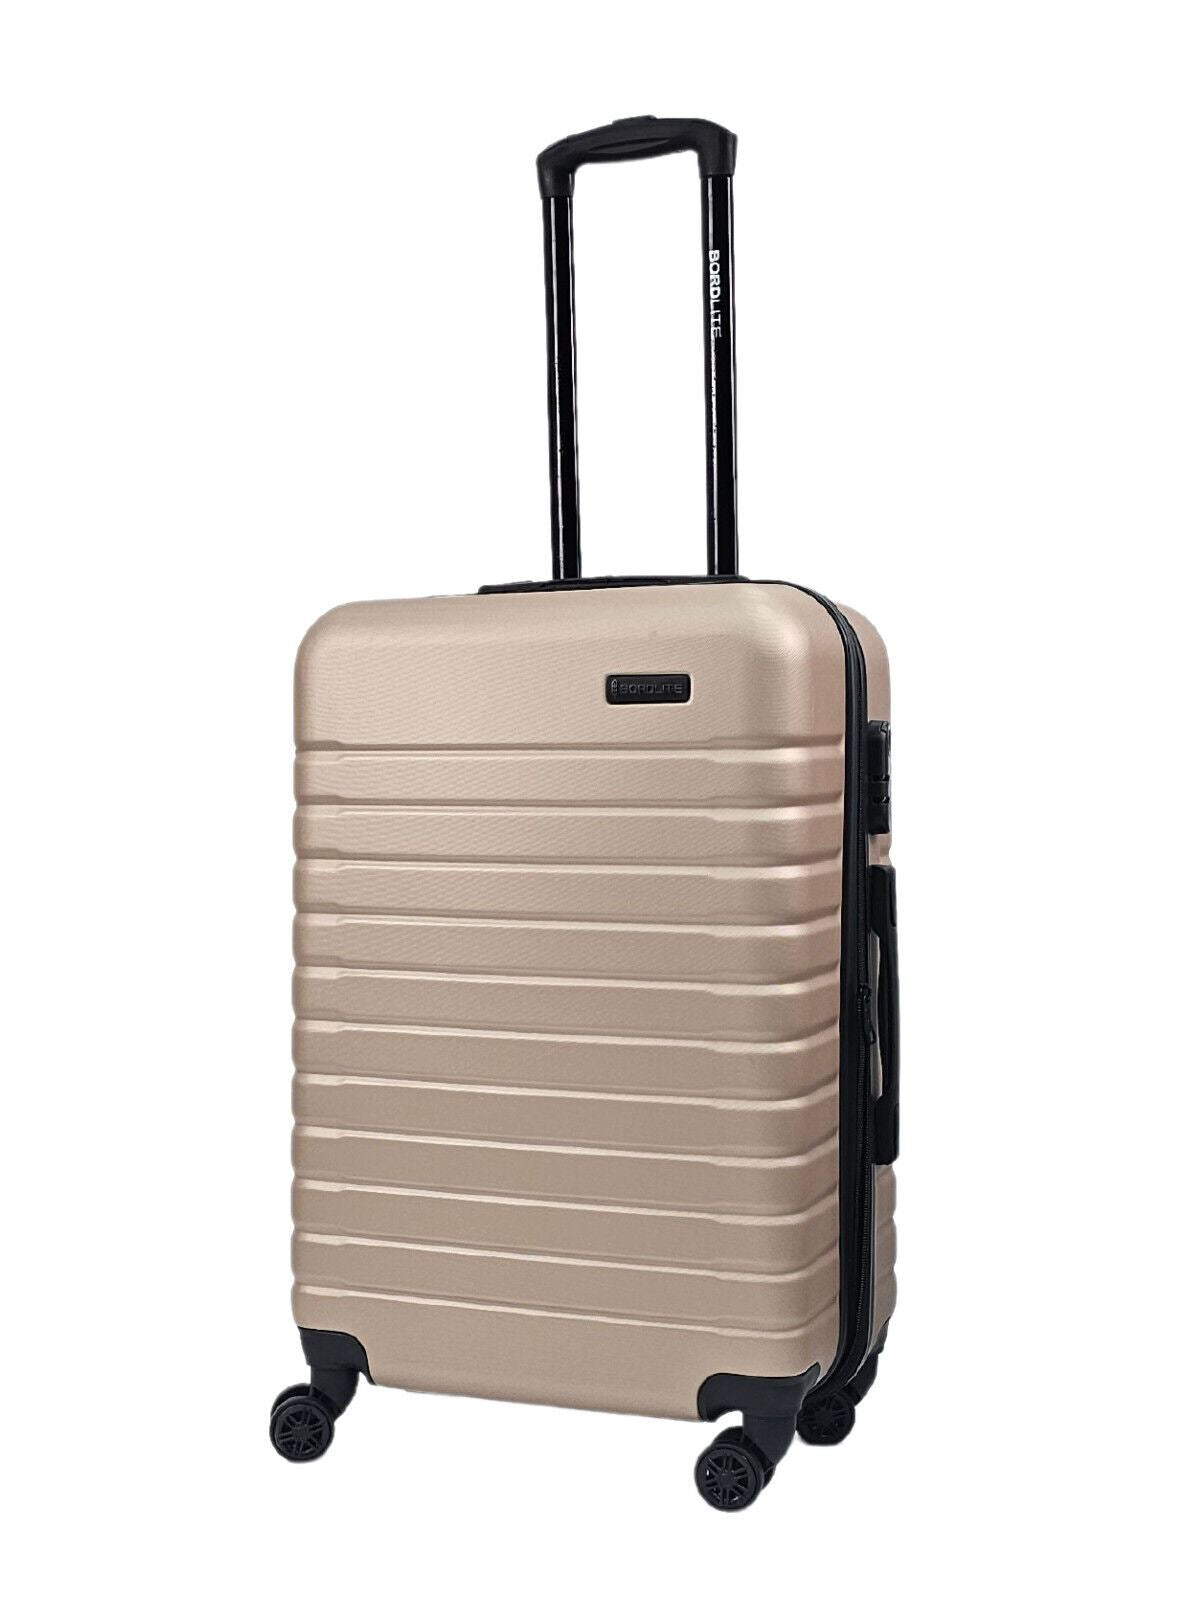 Lightweight Gold Hard Shell ABS Suitcase Luggage Set